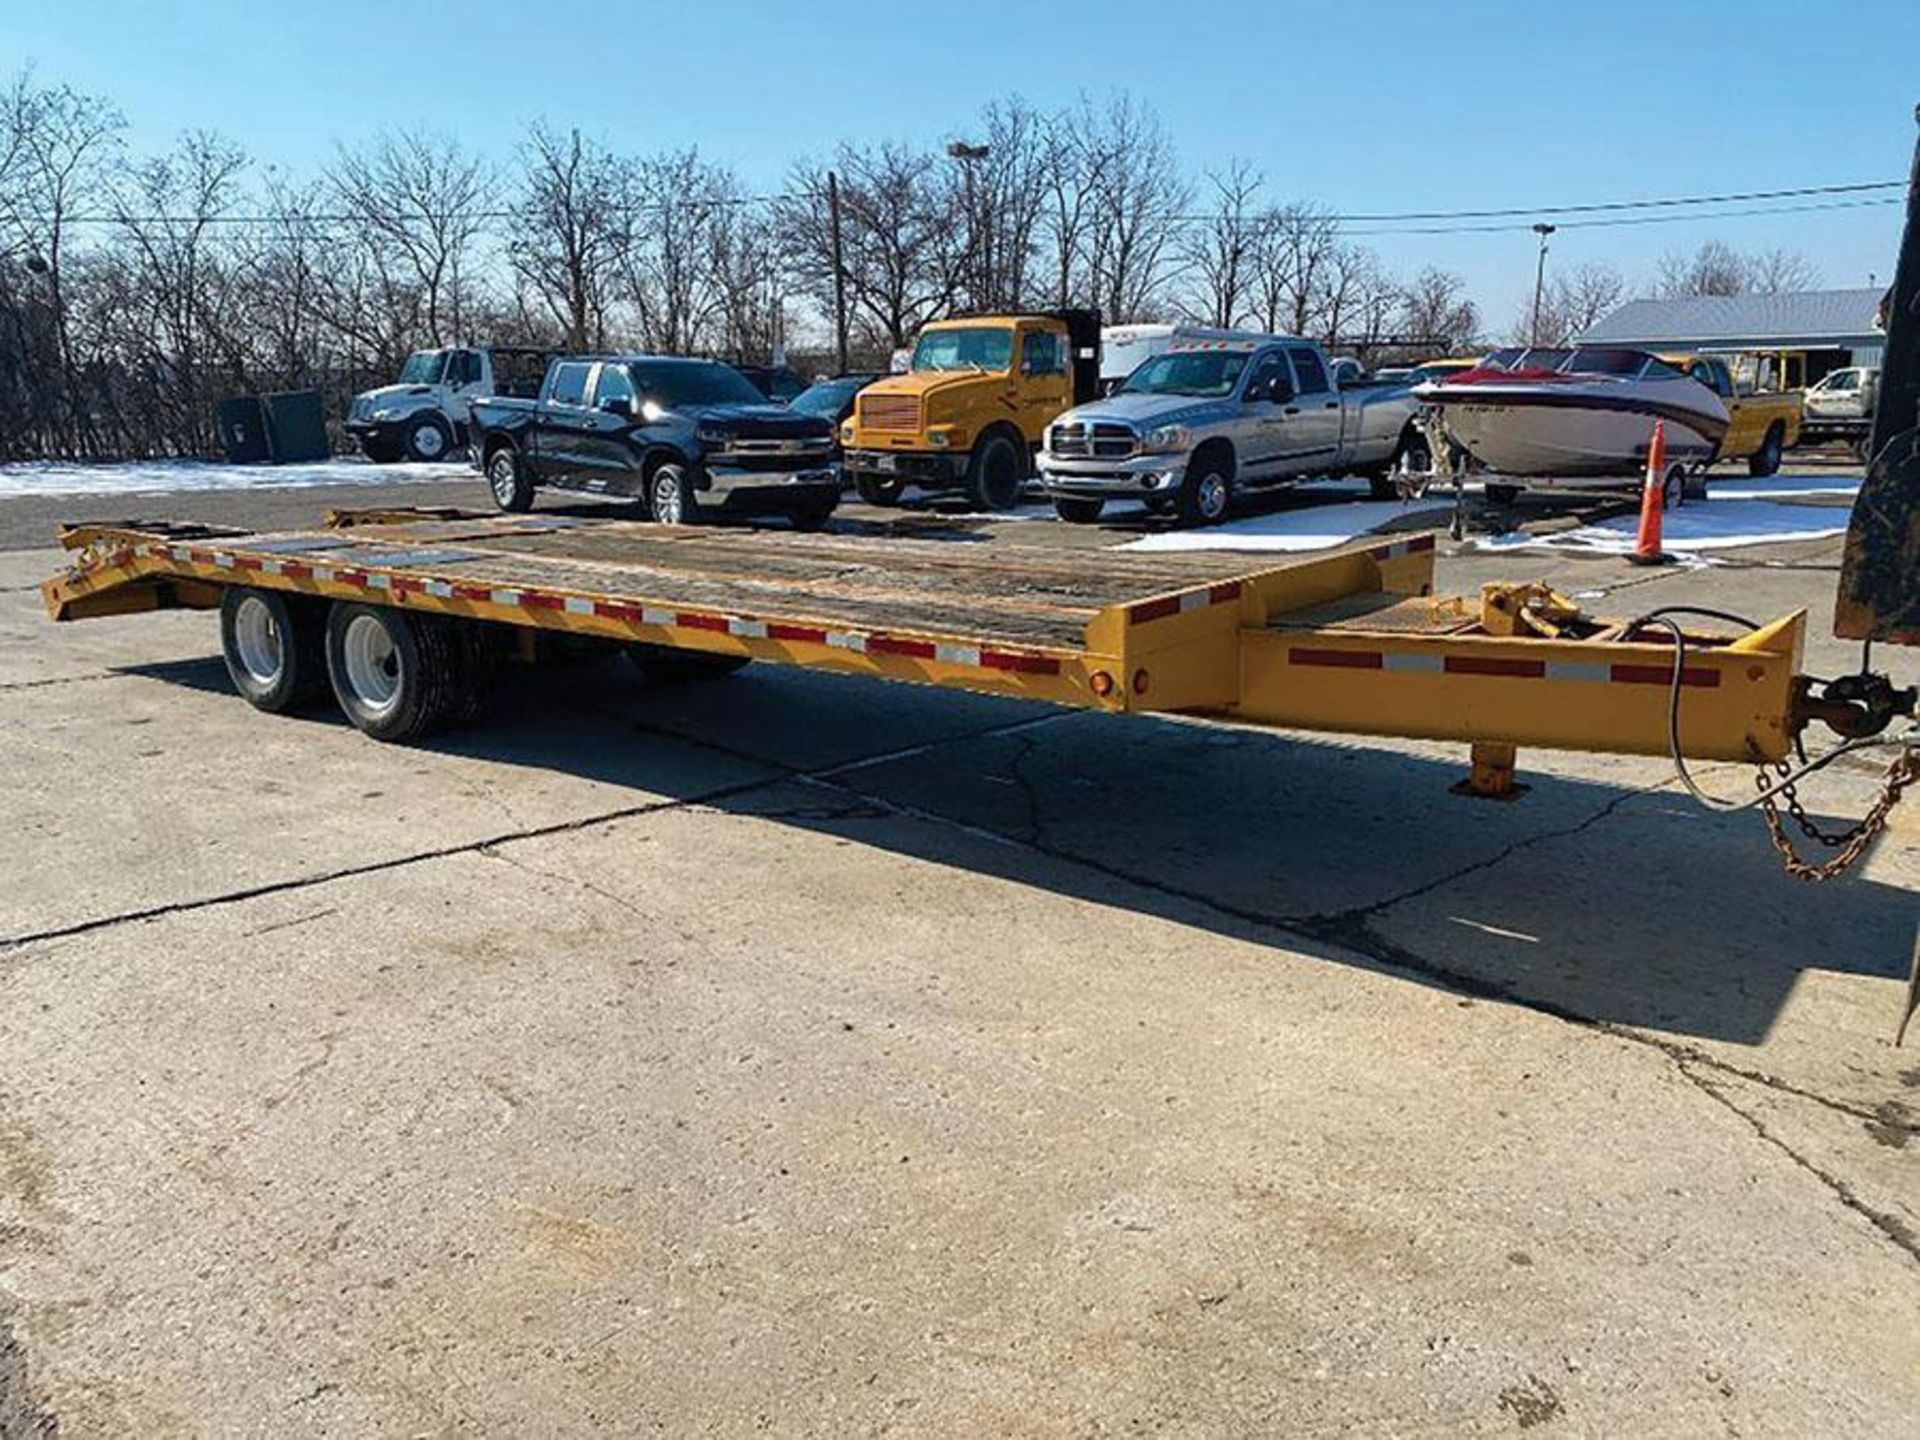 25' T/A DOVETAIL TRAILER, PINTLE HITCH, AIR BRAKES, WOOD DECK, STAKE BED, FOLD OVER STEEL RAMPS, DUA